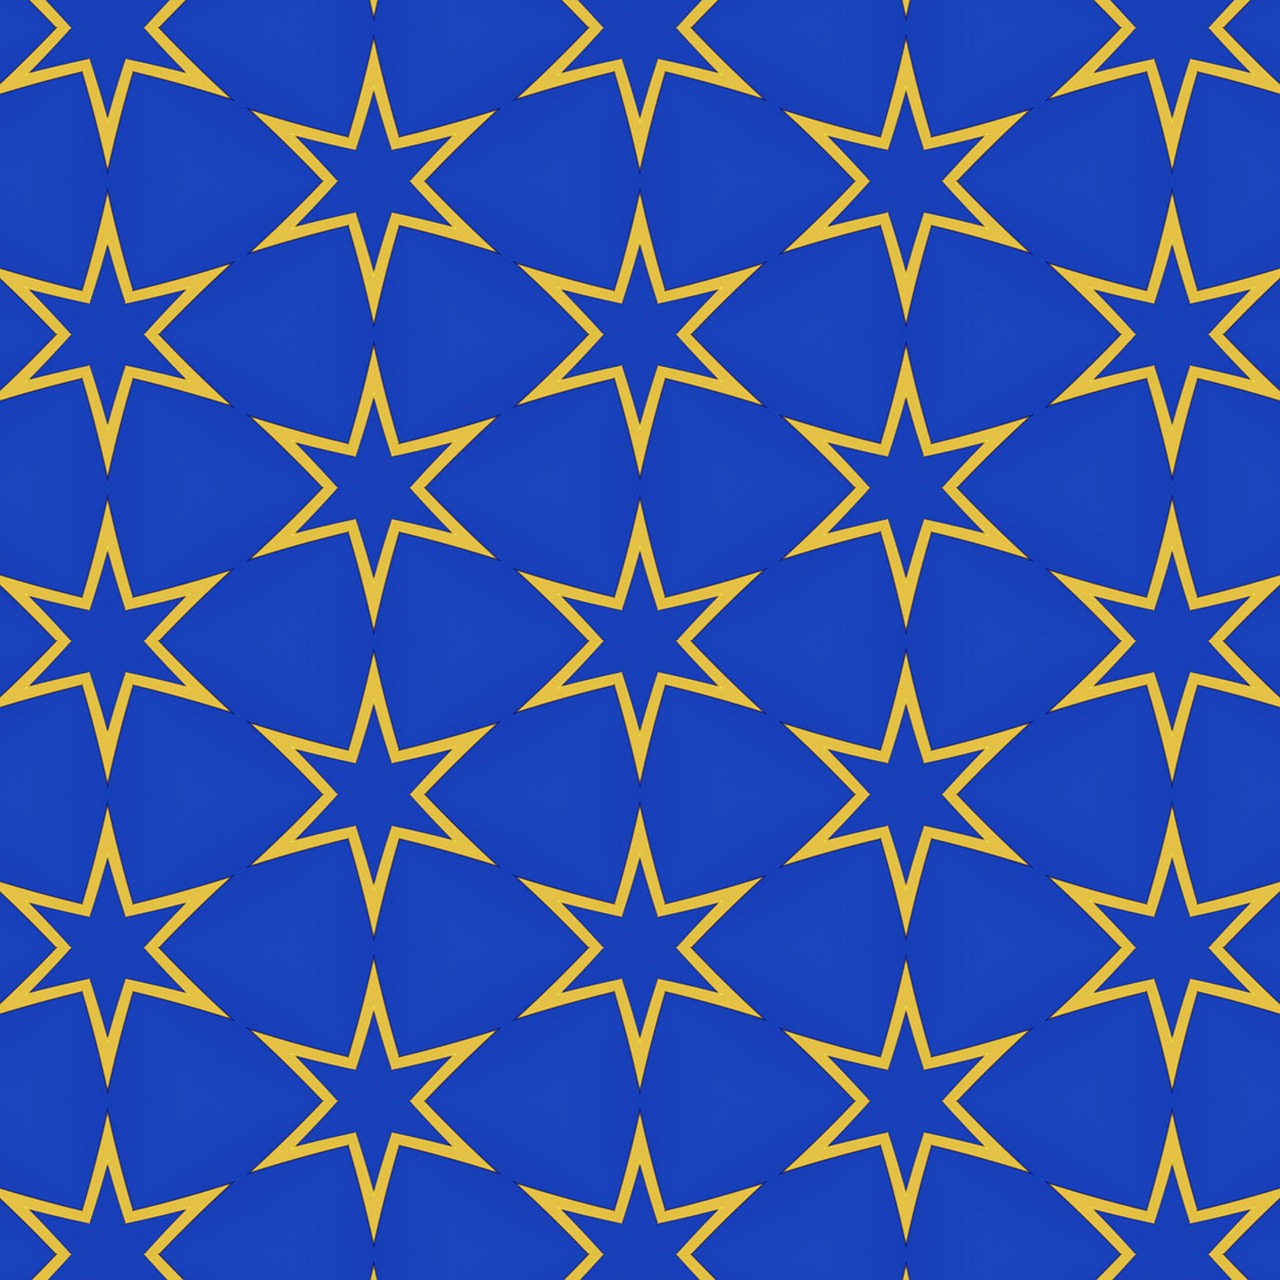 star pattern blue and gold free photo